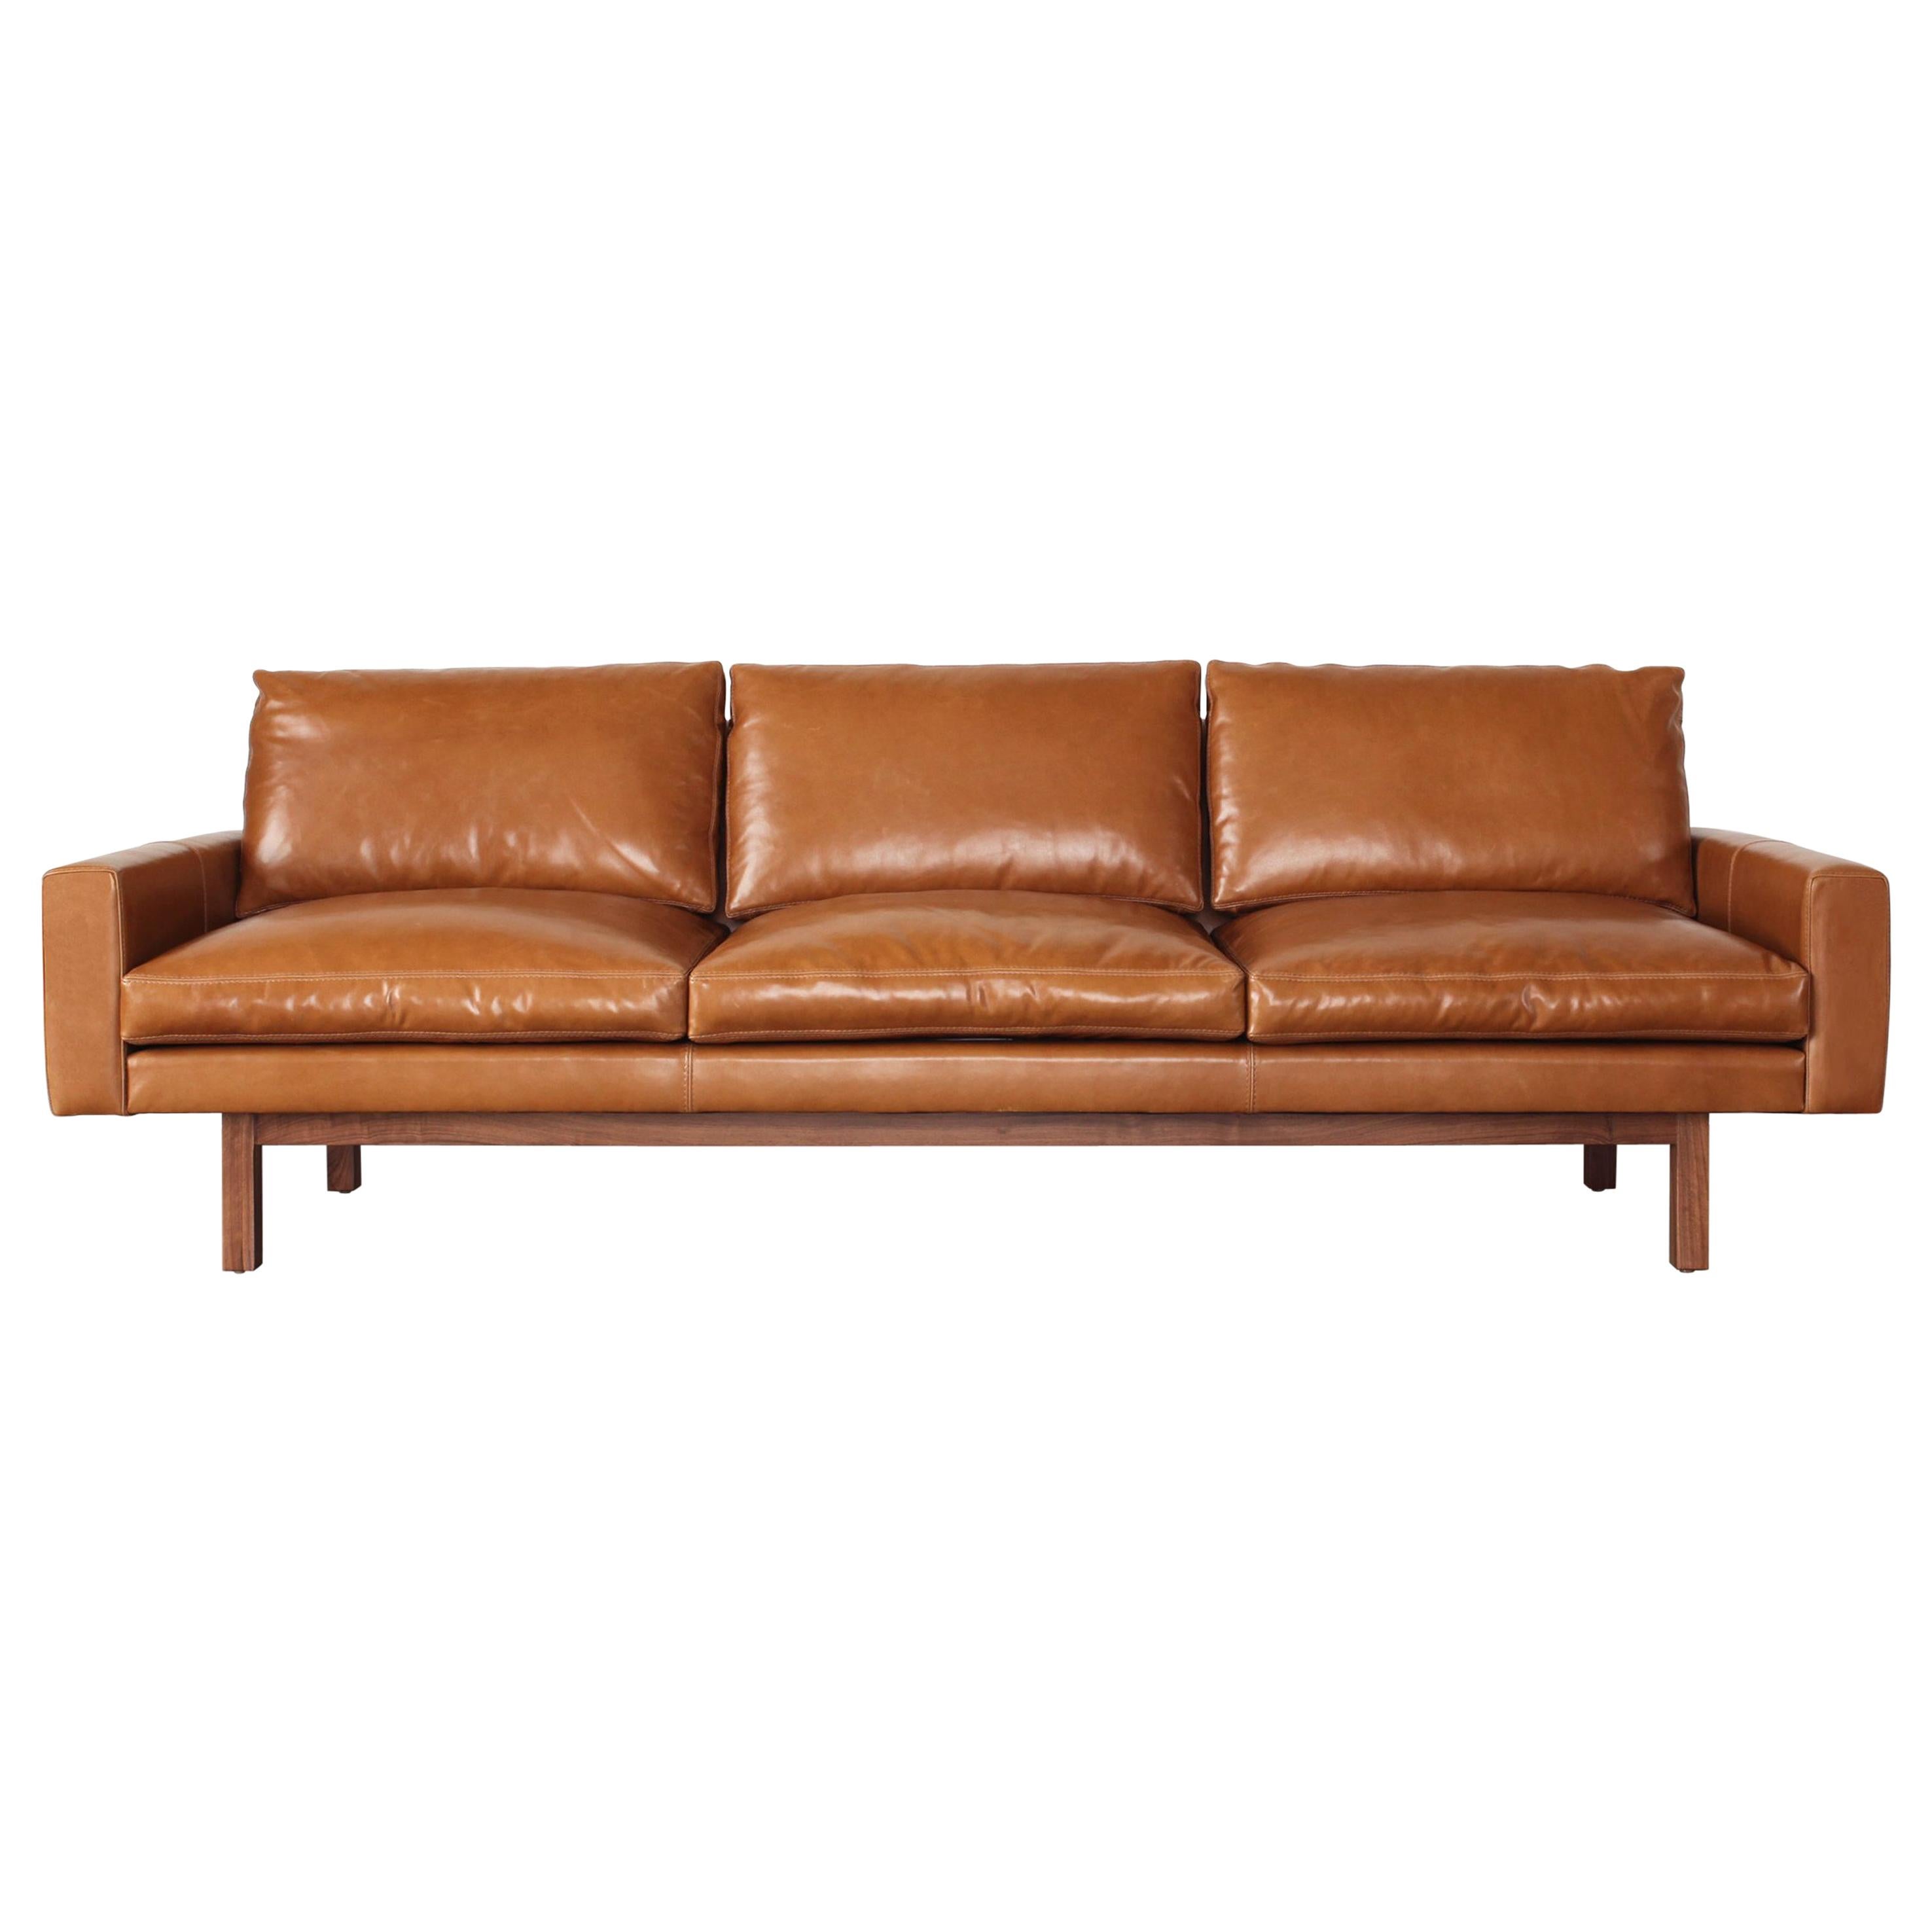 Contemporary Large Standard Sofa in Caramel Leather with Walnut Base